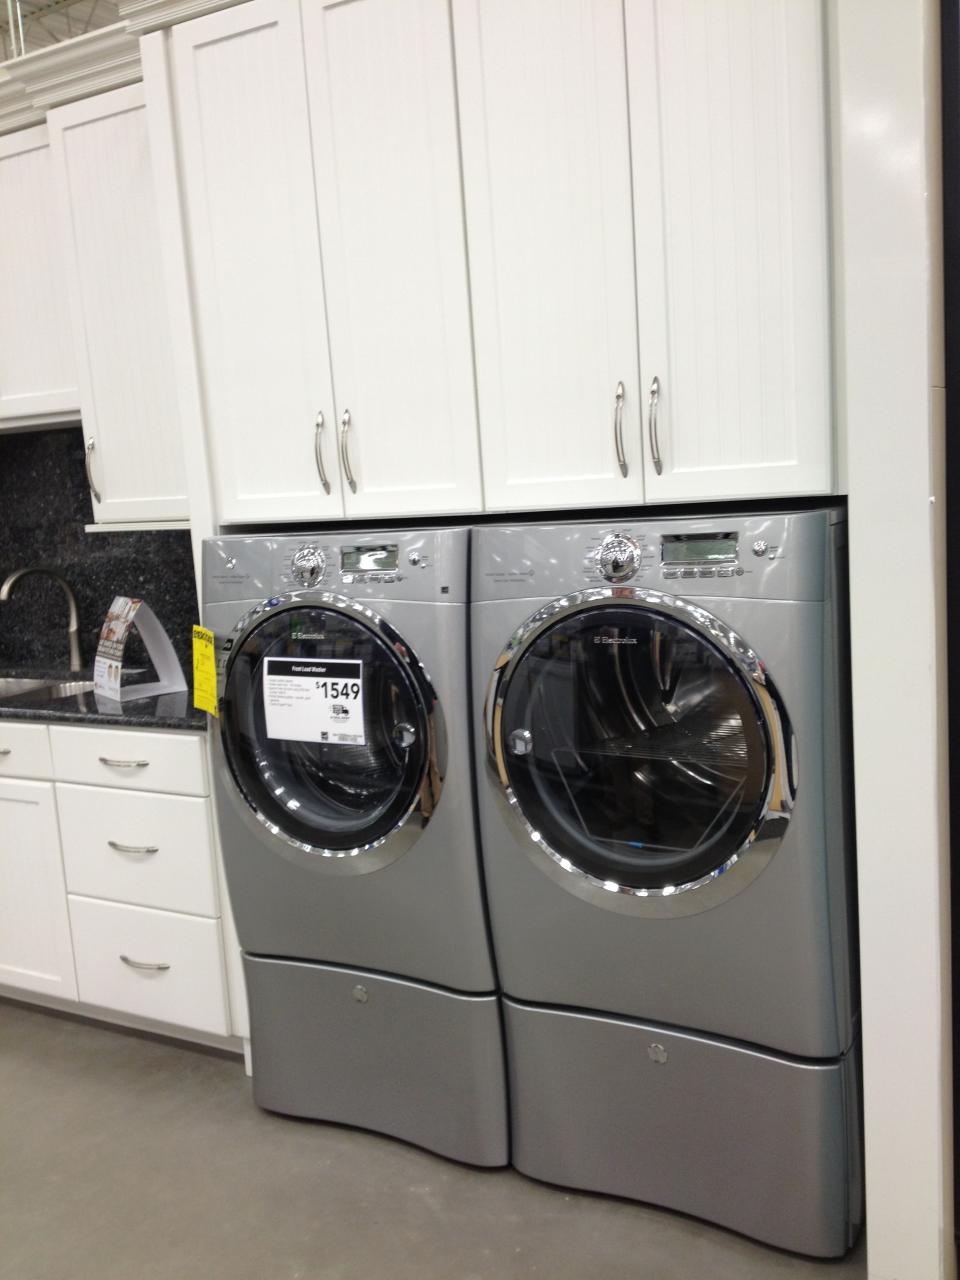 Lowes laundry room ideas the more shelves / cupboards the better